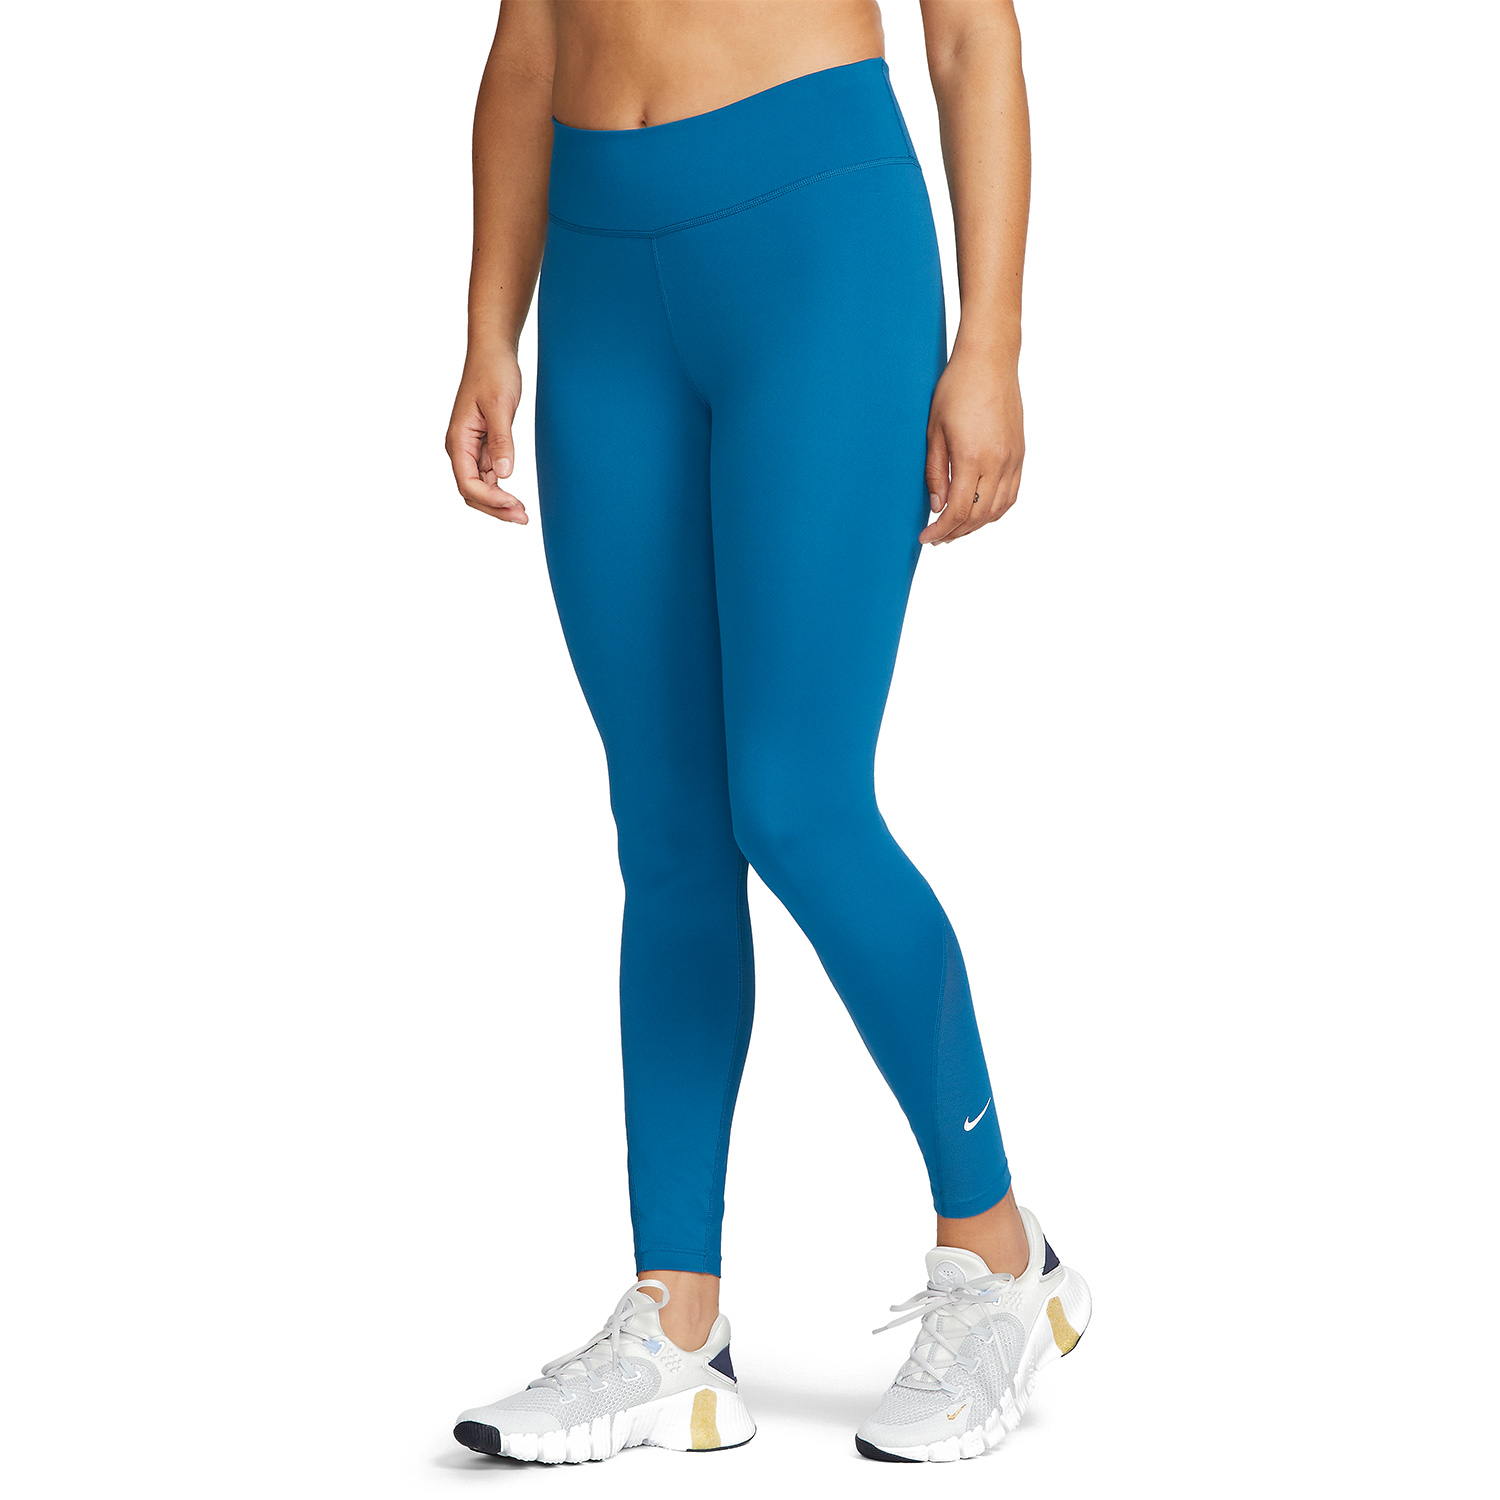 Nike One Mid Rise 7/8 Women's Training Tights - Industrial Blue